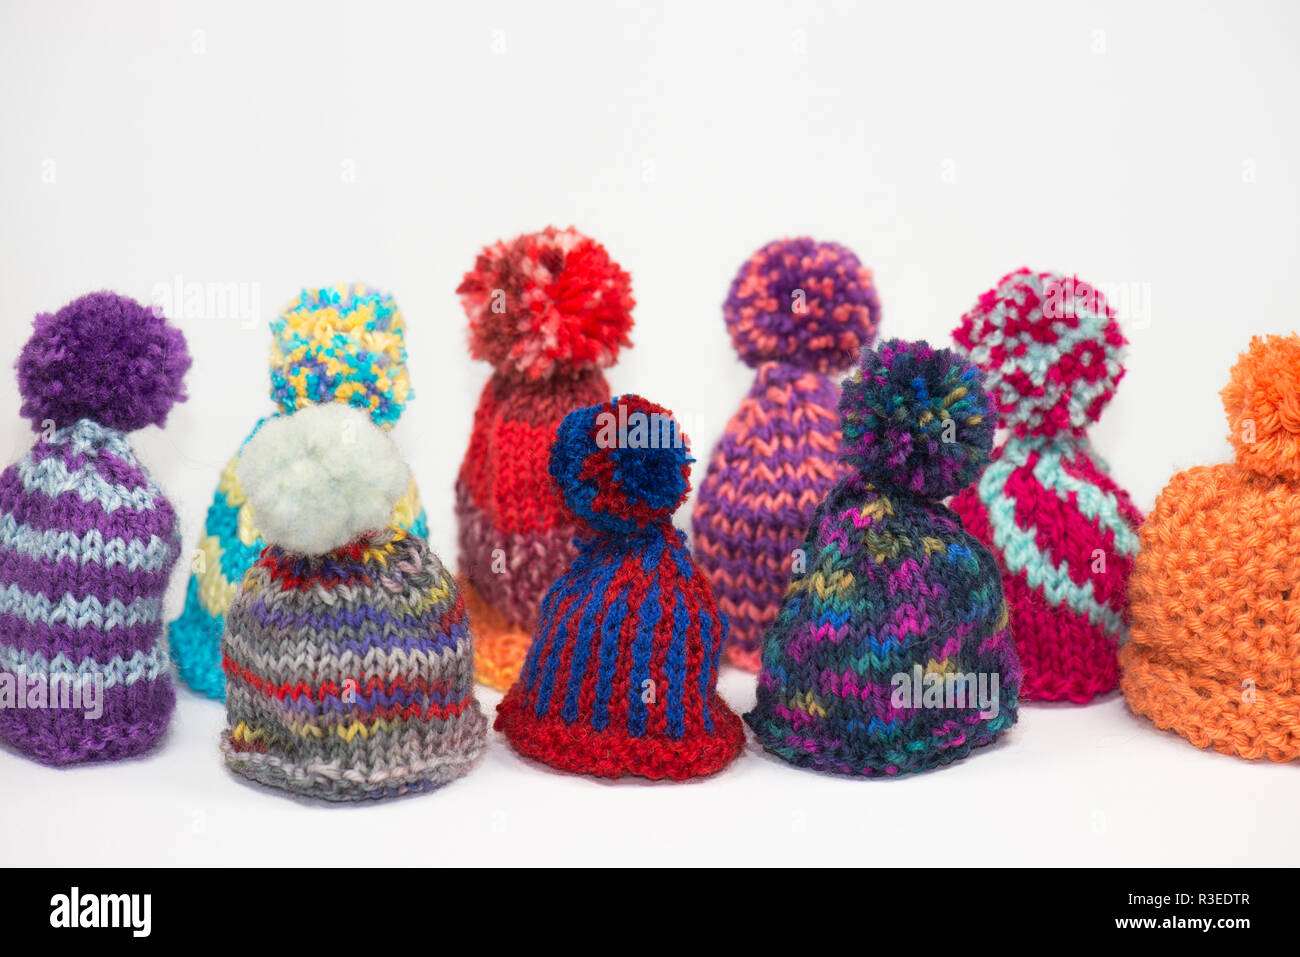 knitted bobble hats Stock Photo